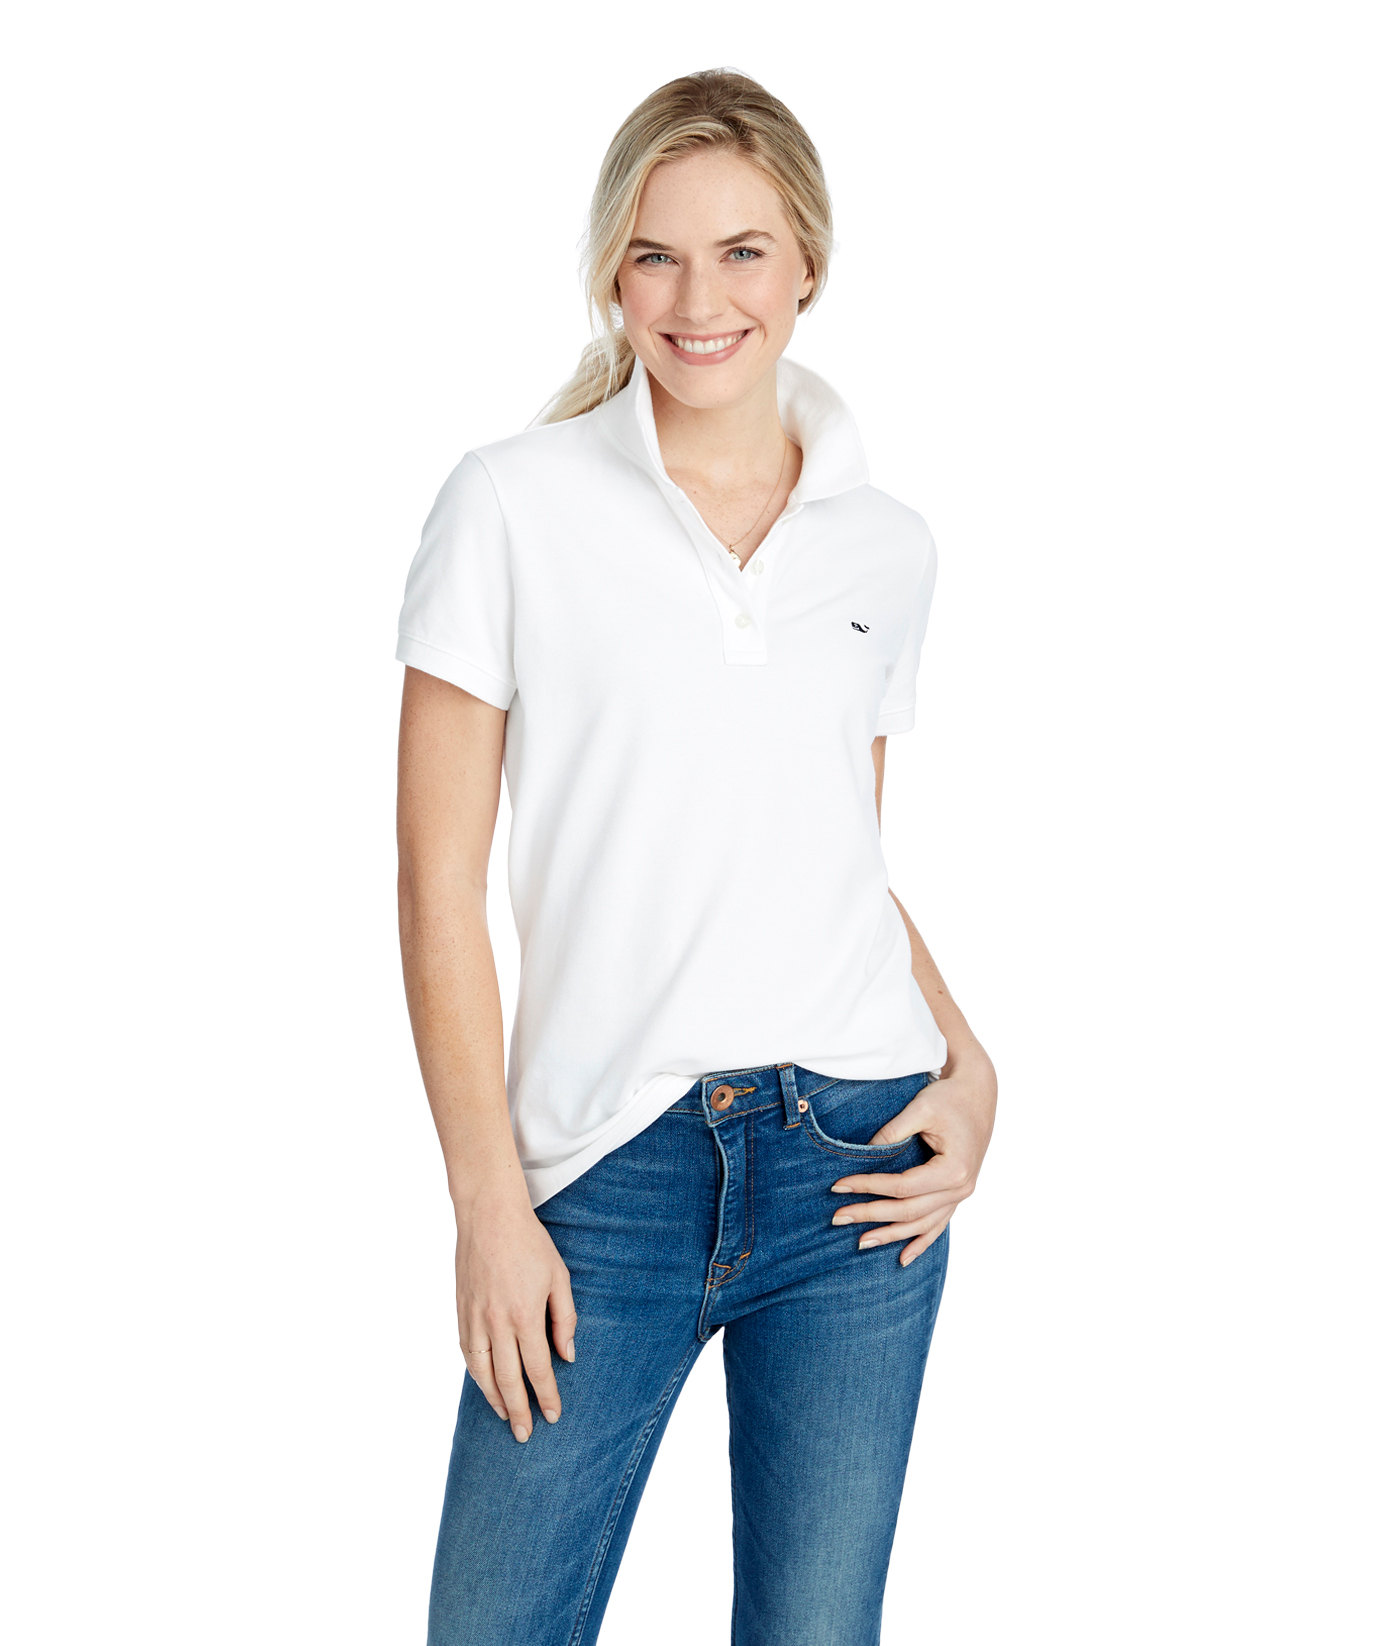 polo outlet womens